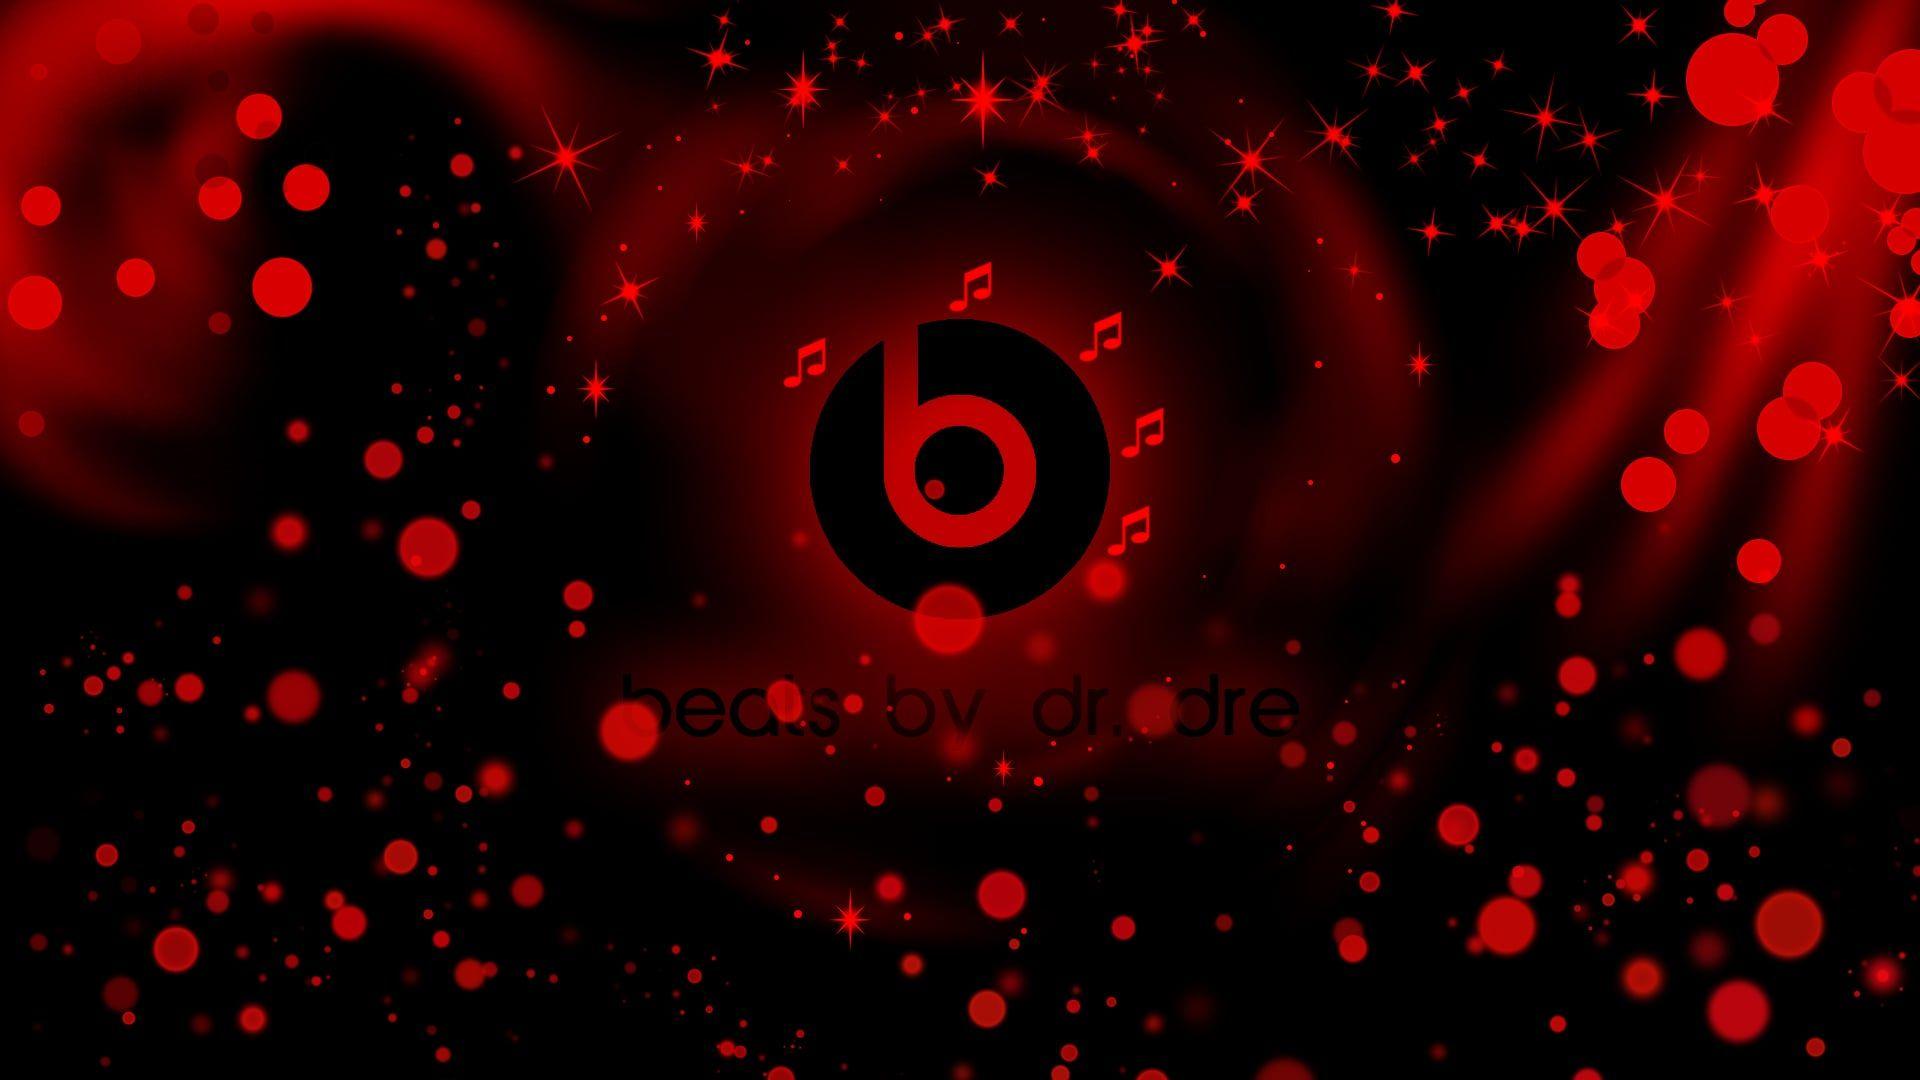 Red and Black Beats Logo - Beats By Dr Dre HD wallpapers Free Download Headphones